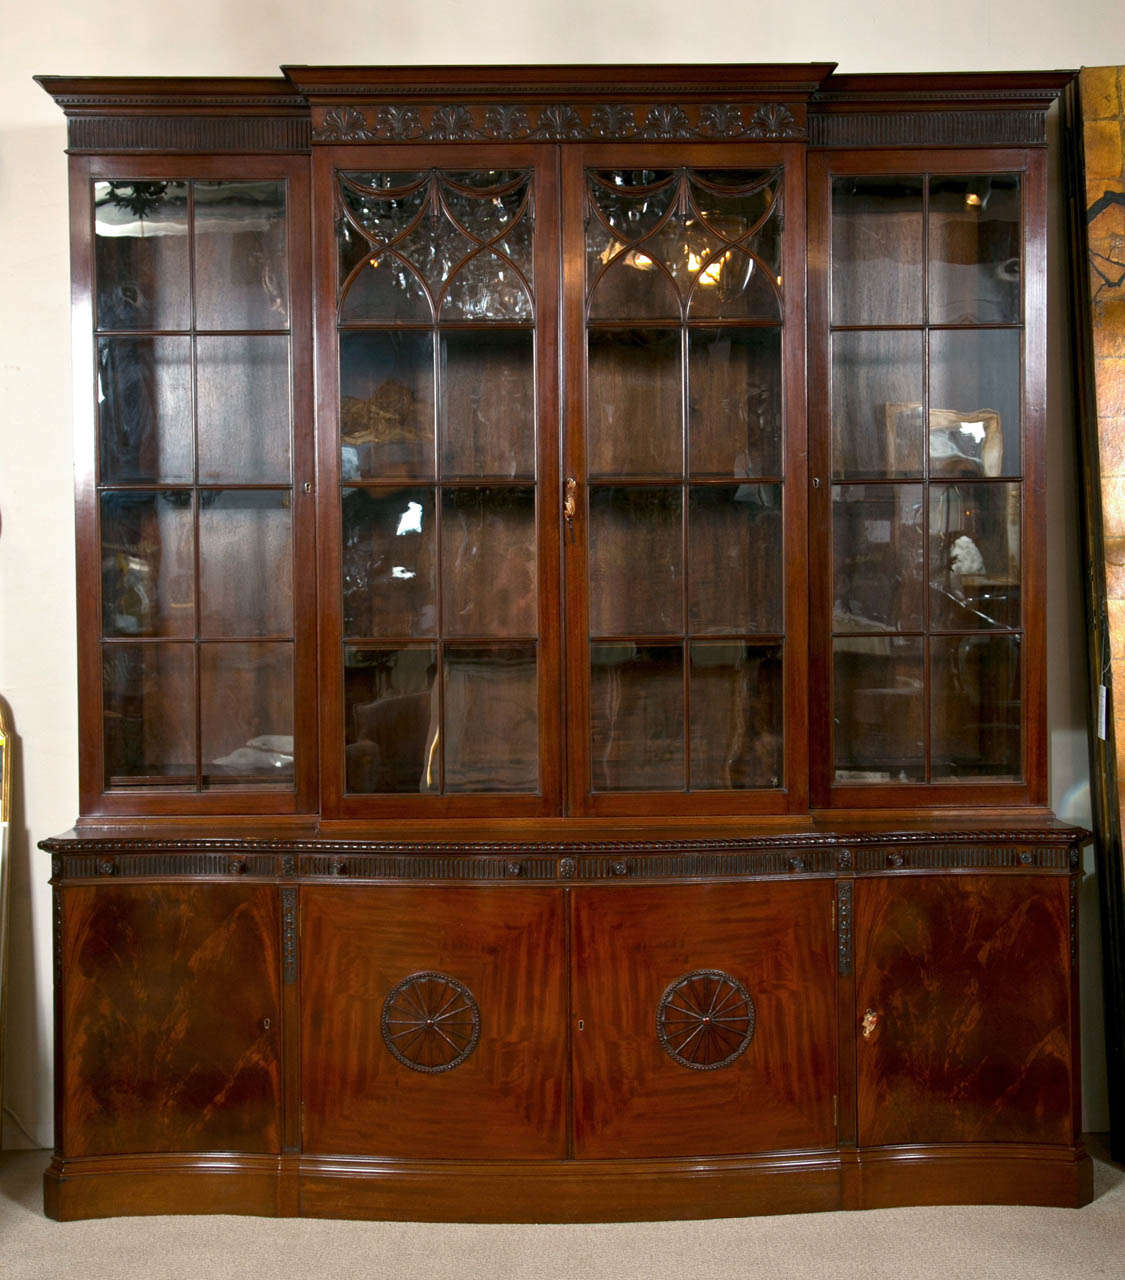 A very finely carved mahogany breakfront bookcase with mitered doors having swag mullions set atop a low hip base. The bookcase has personal reading slides for four made by Maple & Co which was the premier furniture maker in London and Paris during